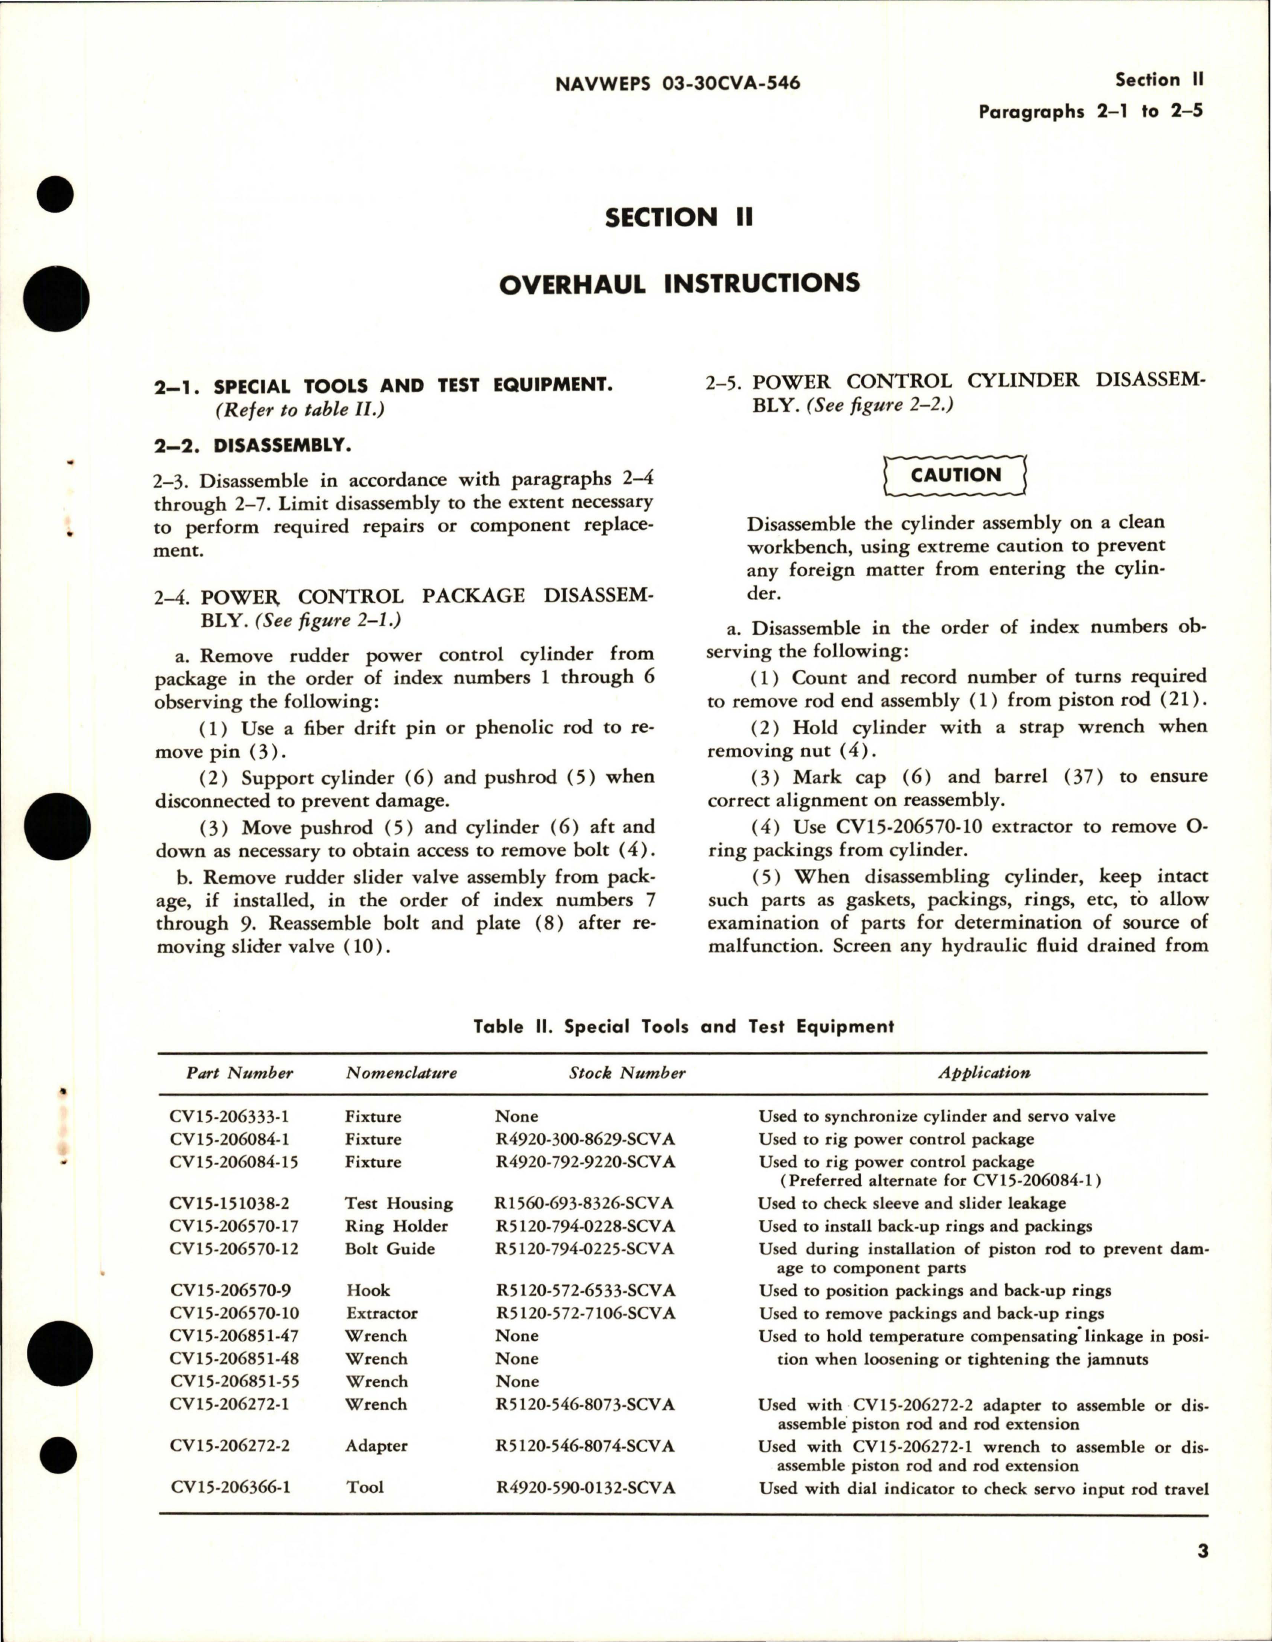 Sample page 7 from AirCorps Library document: Overhaul Instructions for Rudder Control, Cylinder Assy, Valve Assy, Rigging Fixtures, Synchronization Fixture